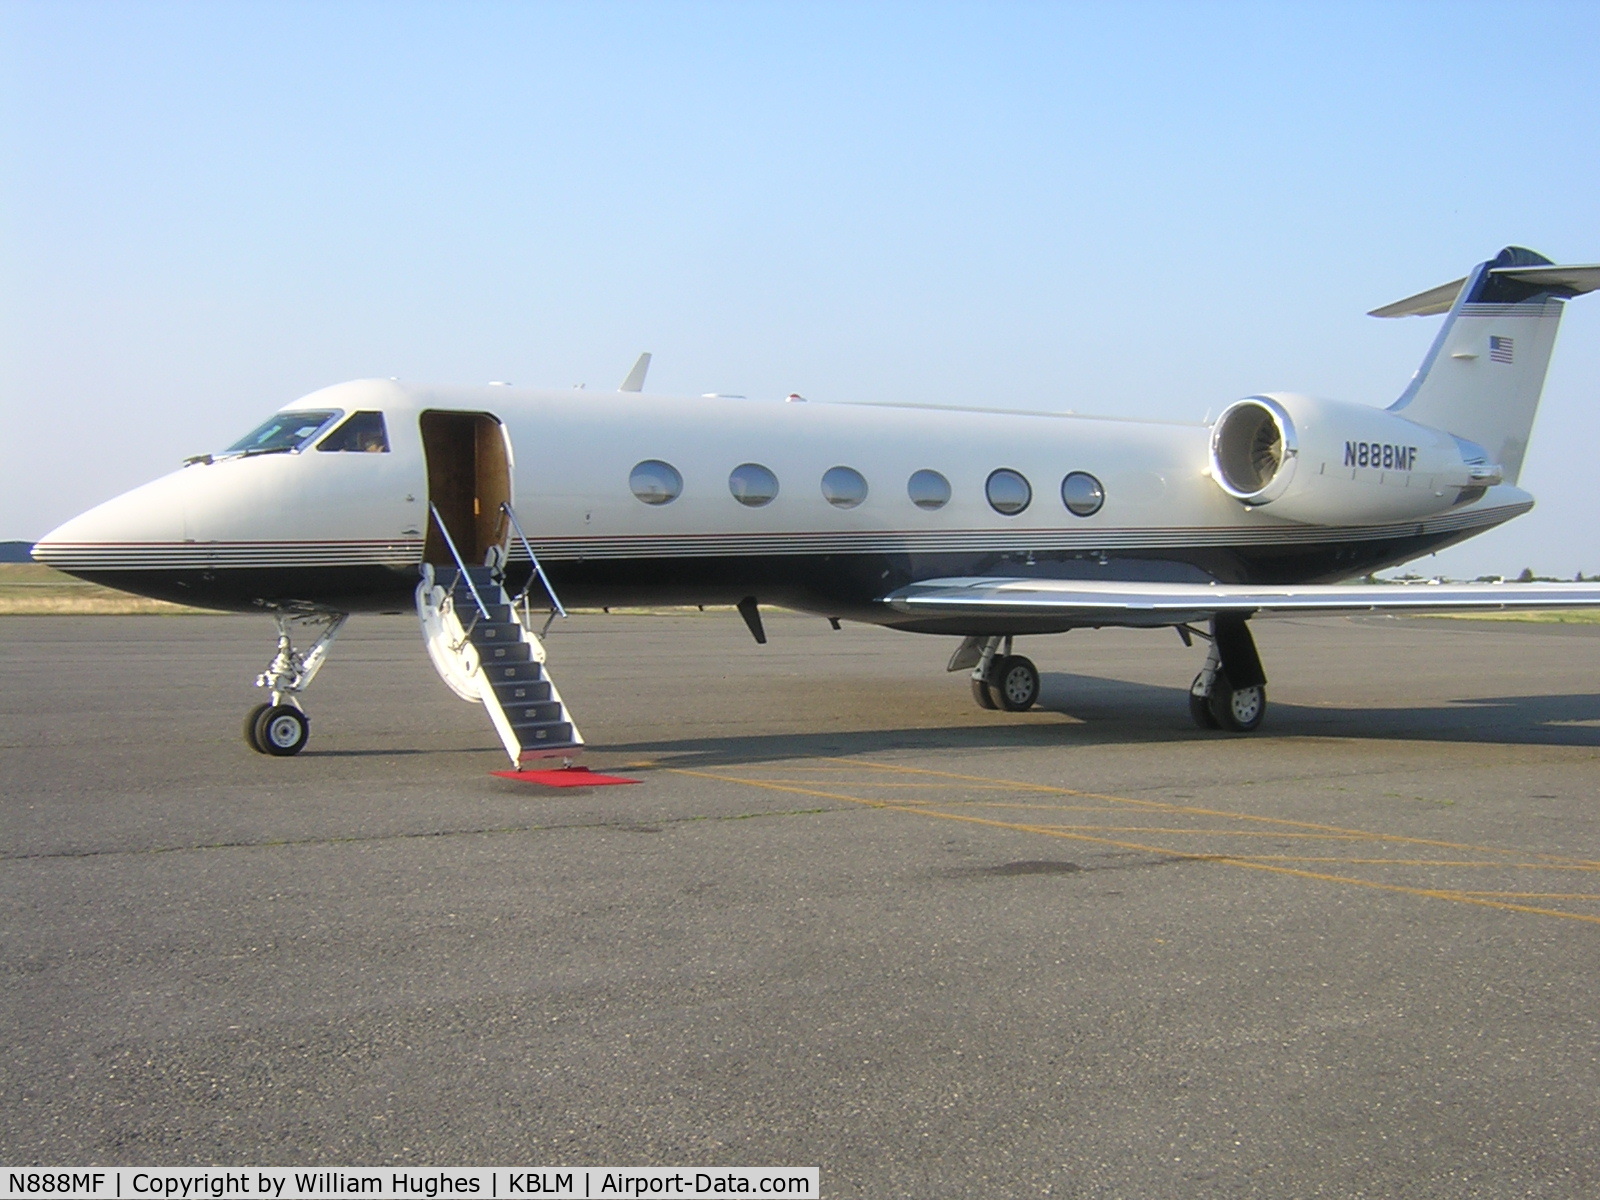 N888MF, 1995 Gulfstream Aerospace G-IV C/N 1268, just arrived with the owners from Miami